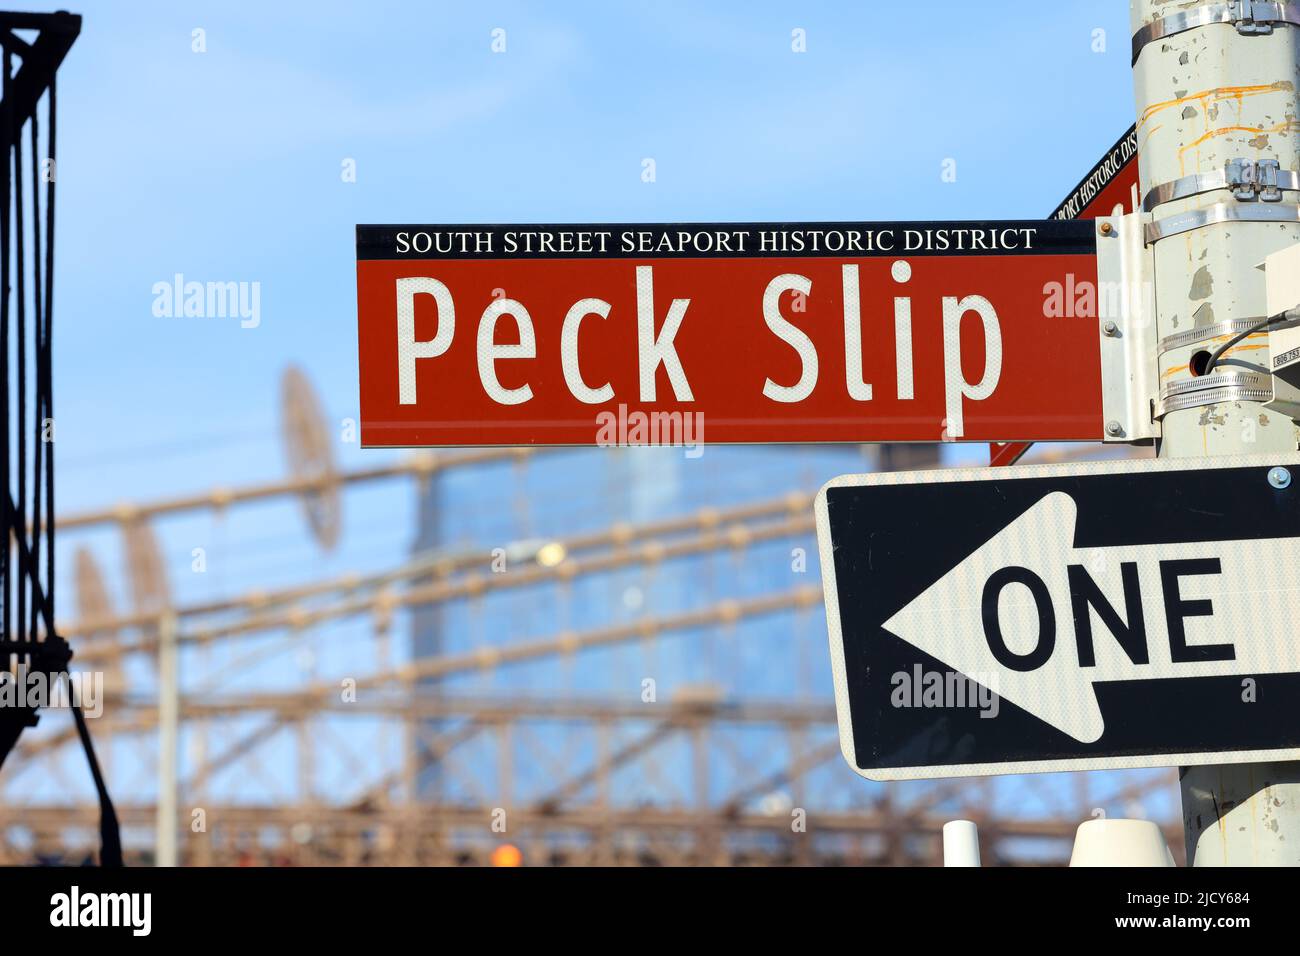 Peck Slip street sign in the South Street Seaport Historic District, Manhattan, New York City. Stock Photo